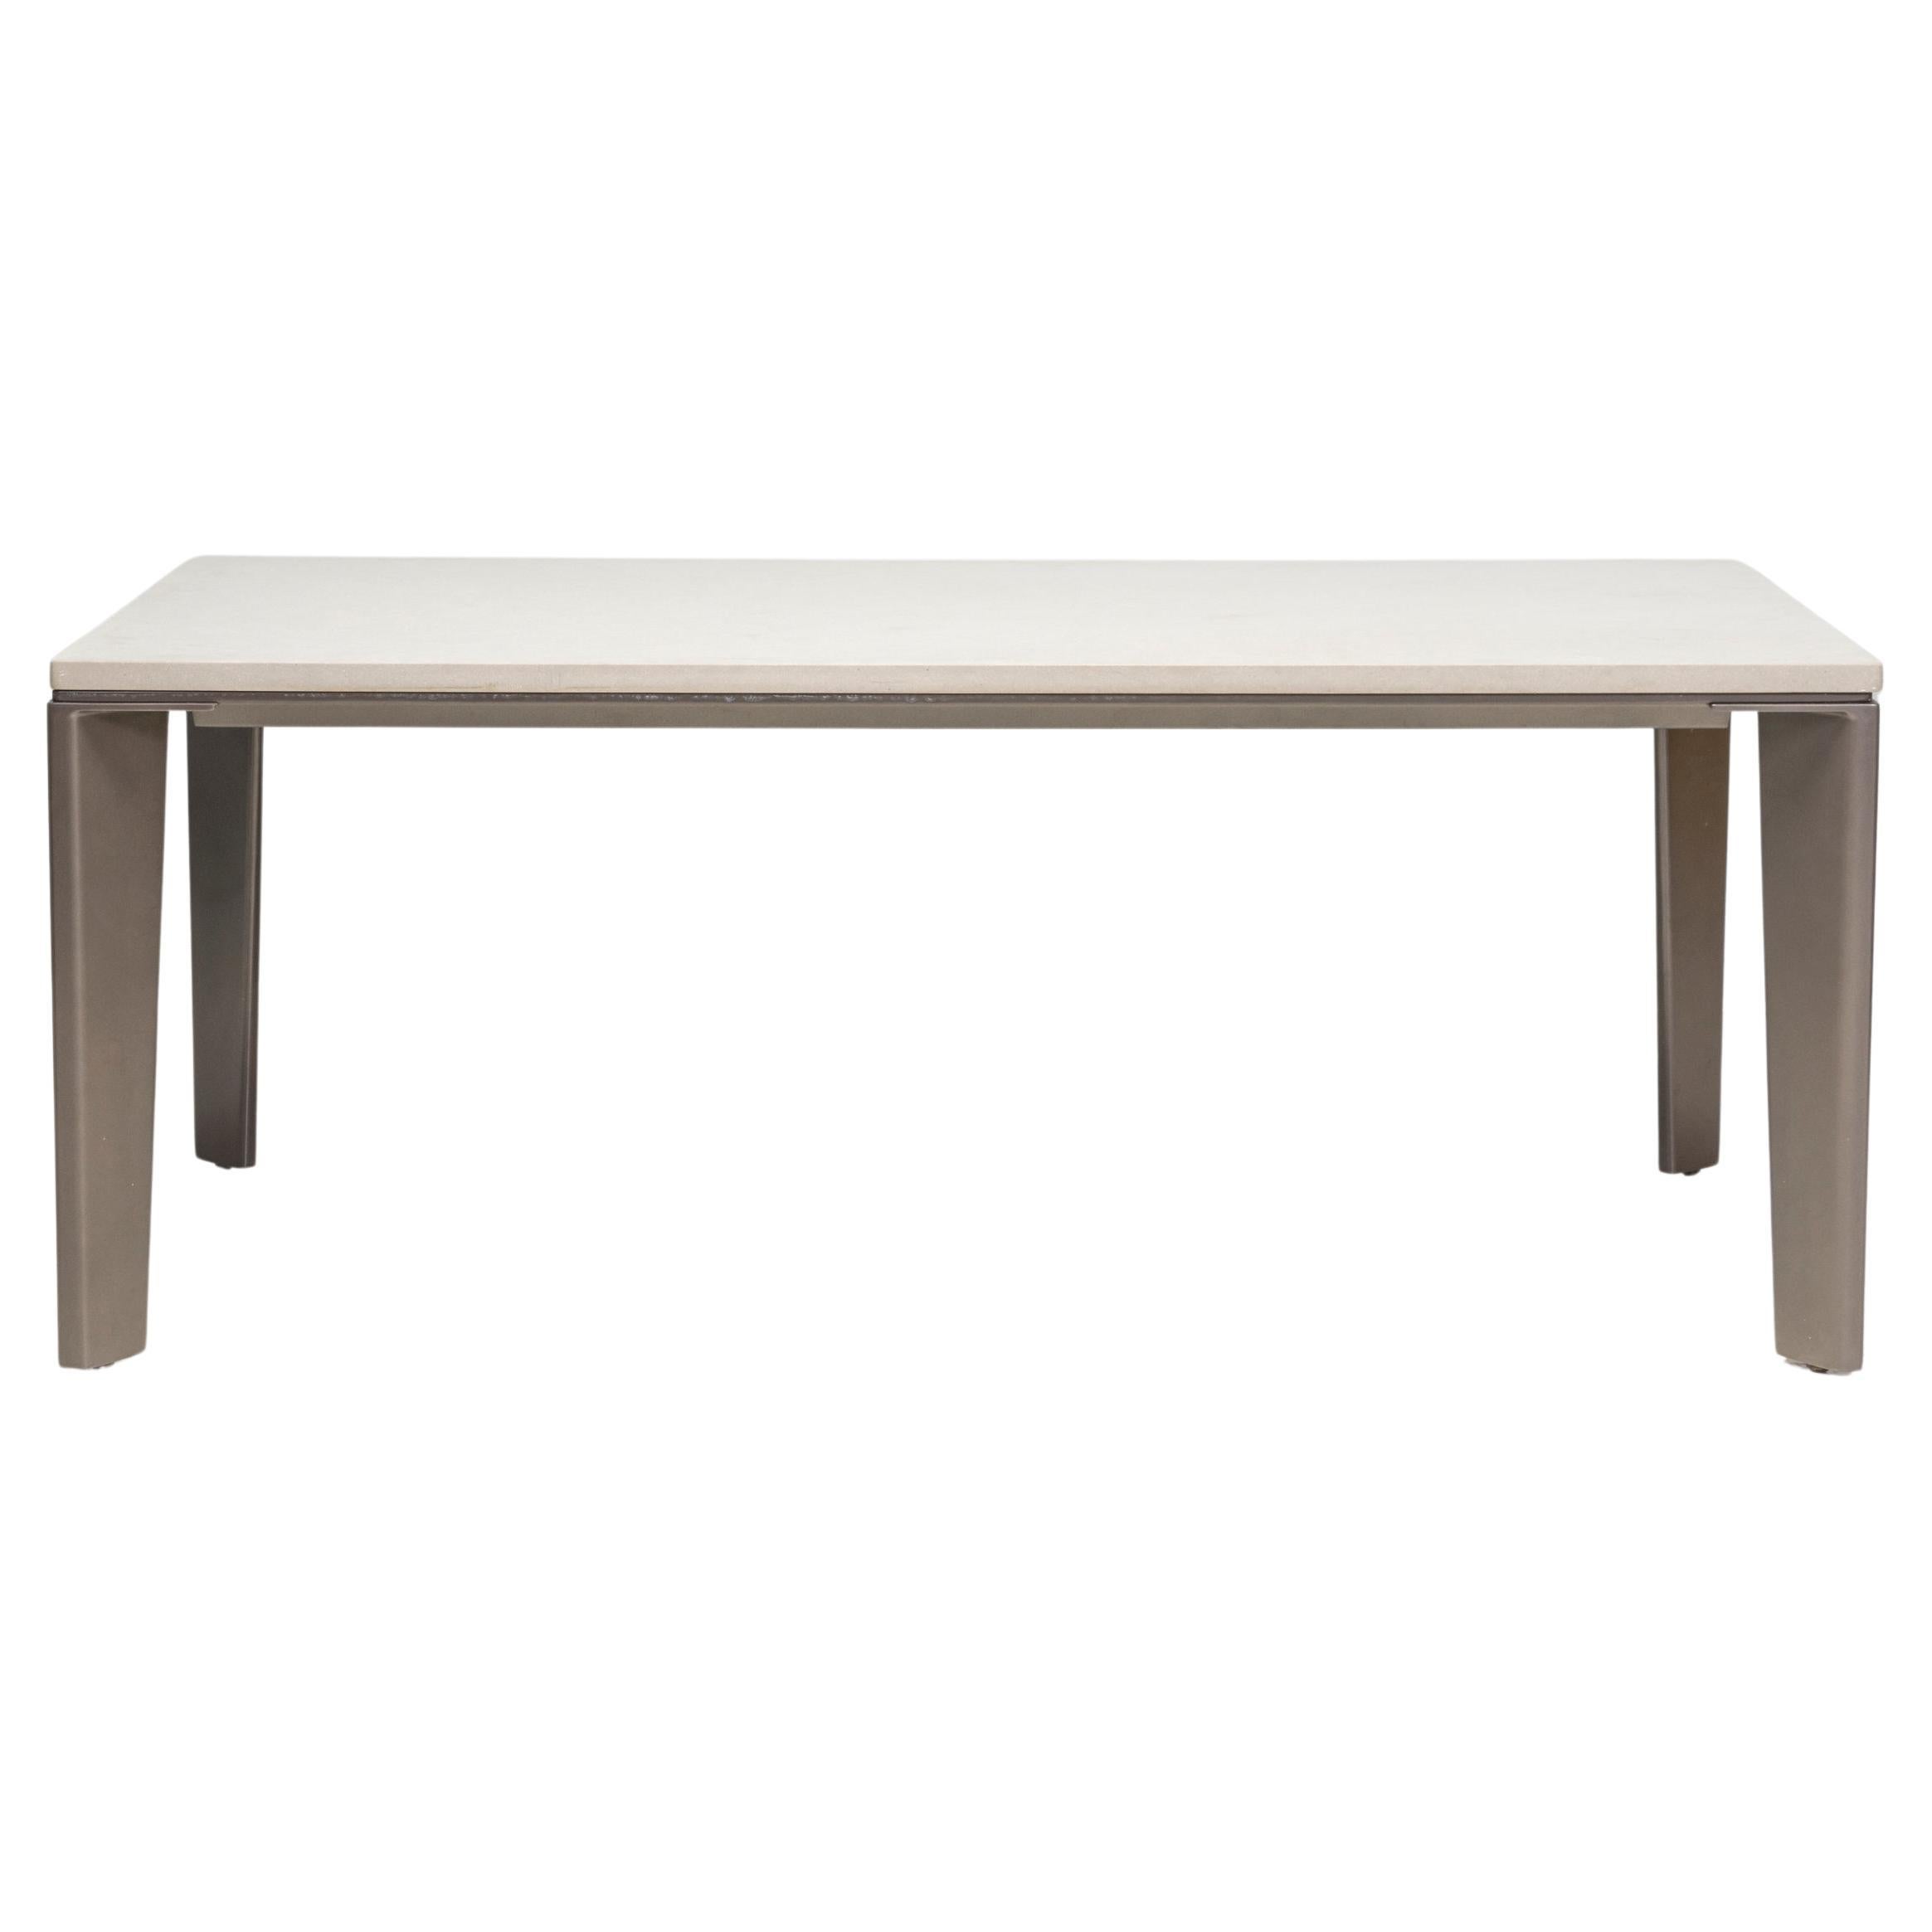  Holly Hunt Grey Keel Cement Outdoor Dining Table  For Sale